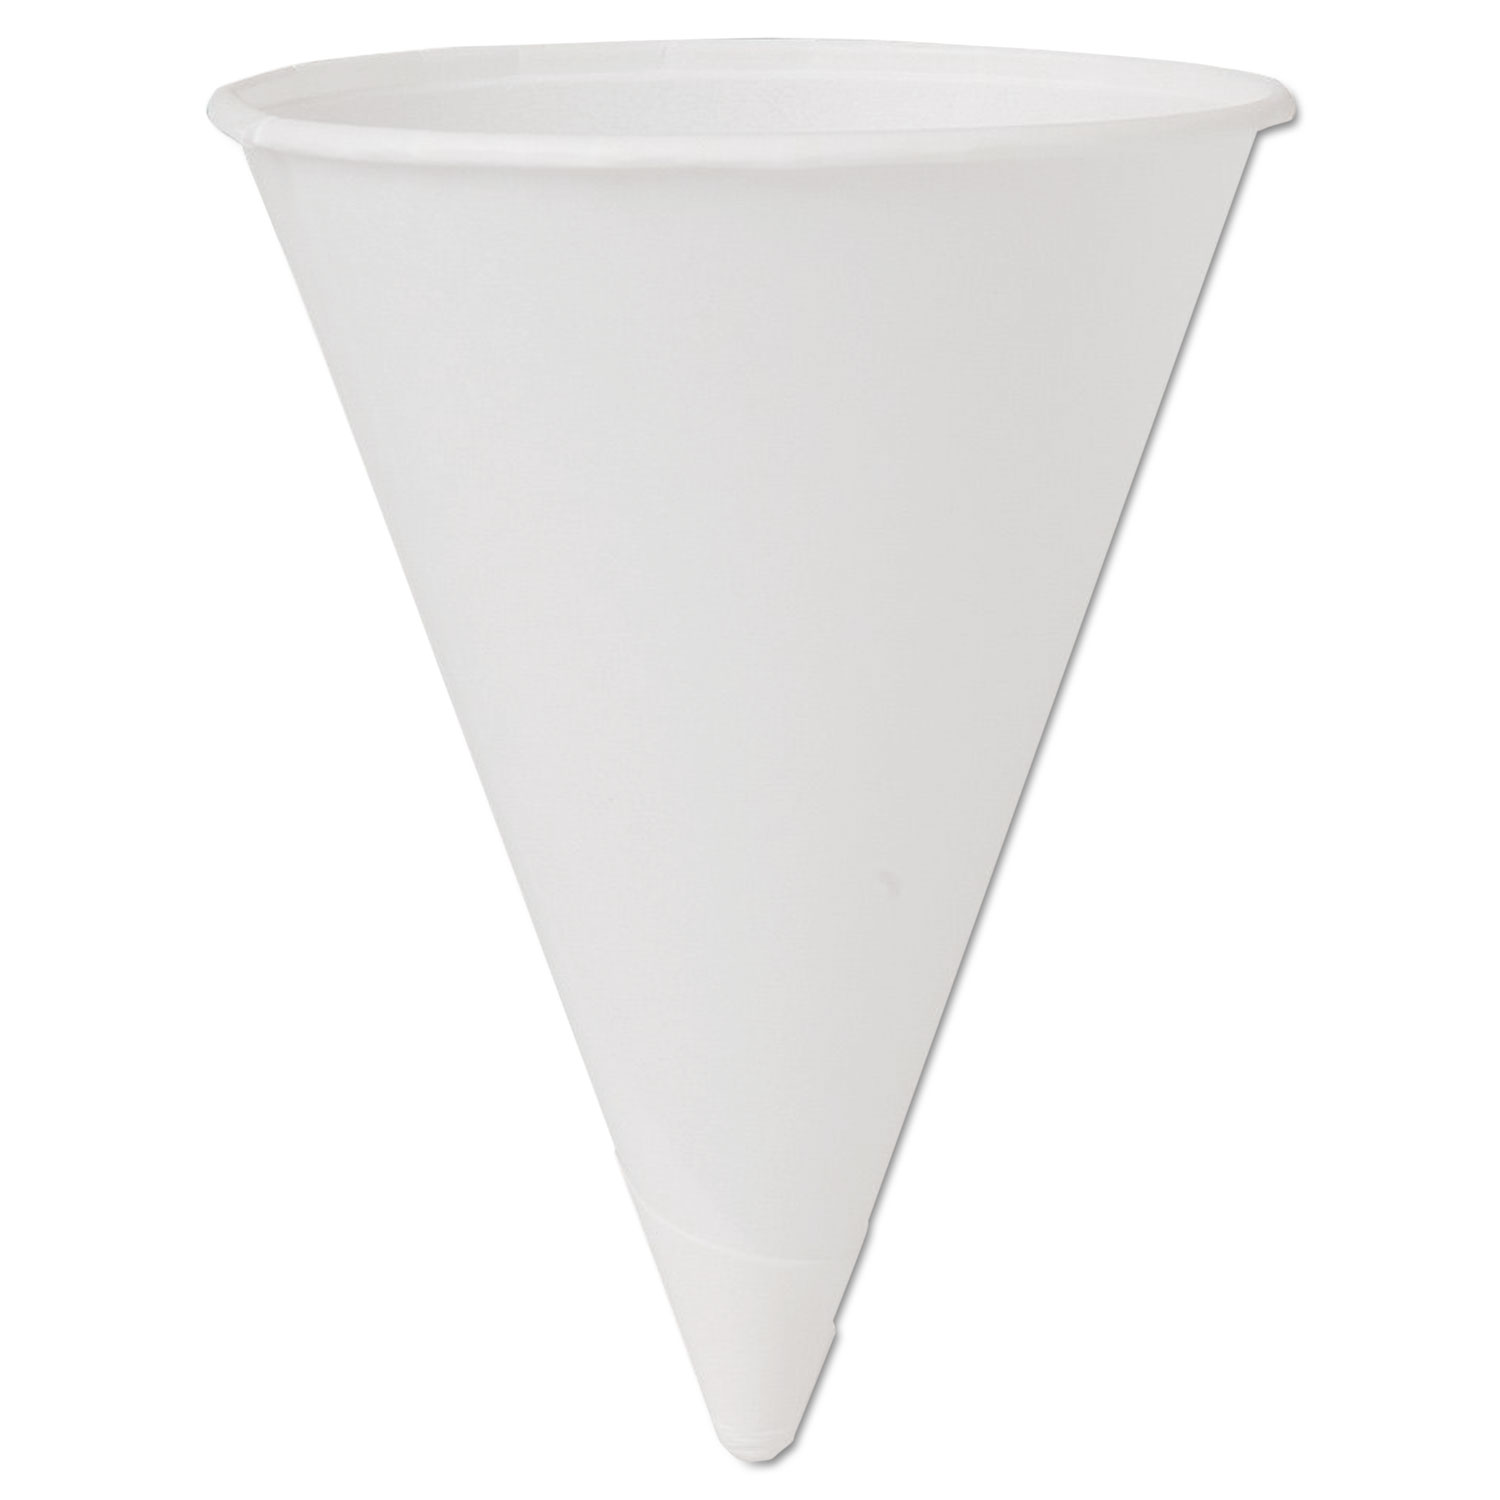  Dart 4BR-2050 Cone Water Cups, Cold, Paper, 4oz, White, 200/Pack (SCC4BR) 